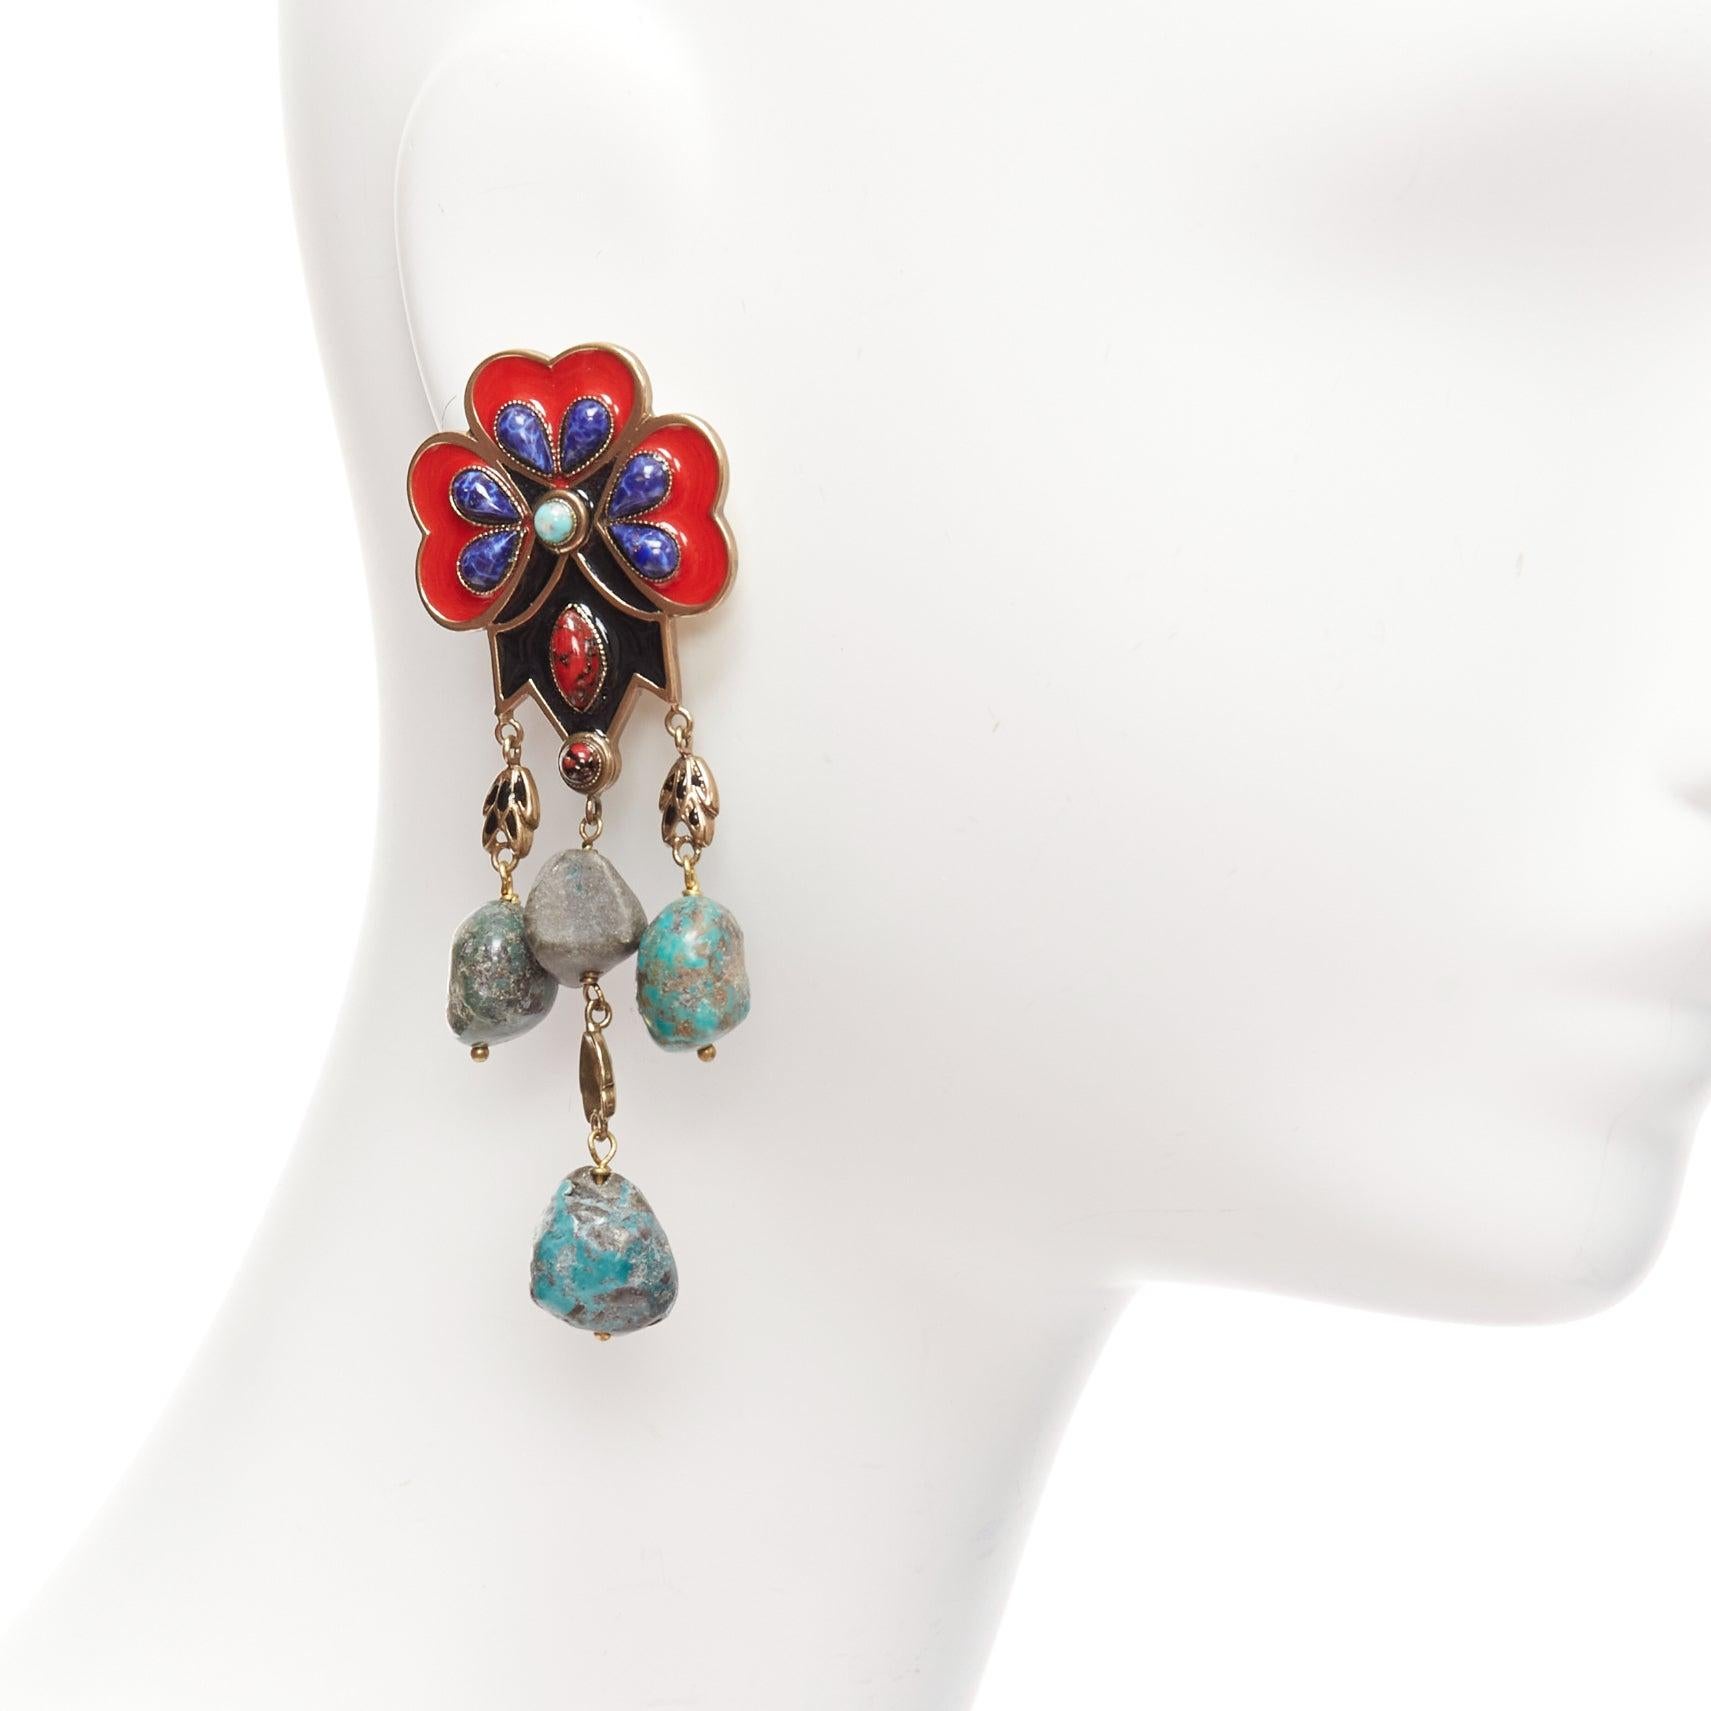 ETRO red blue enamel flower drop stone gold drop clip on earrings pair
Reference: AAWC/A00899
Brand: Etro
Material: Metal
Color: Bronze, Multicolour
Pattern: Solid
Closure: Clip On
Lining: Bronze Metal

CONDITION:
Condition: Excellent, this item was